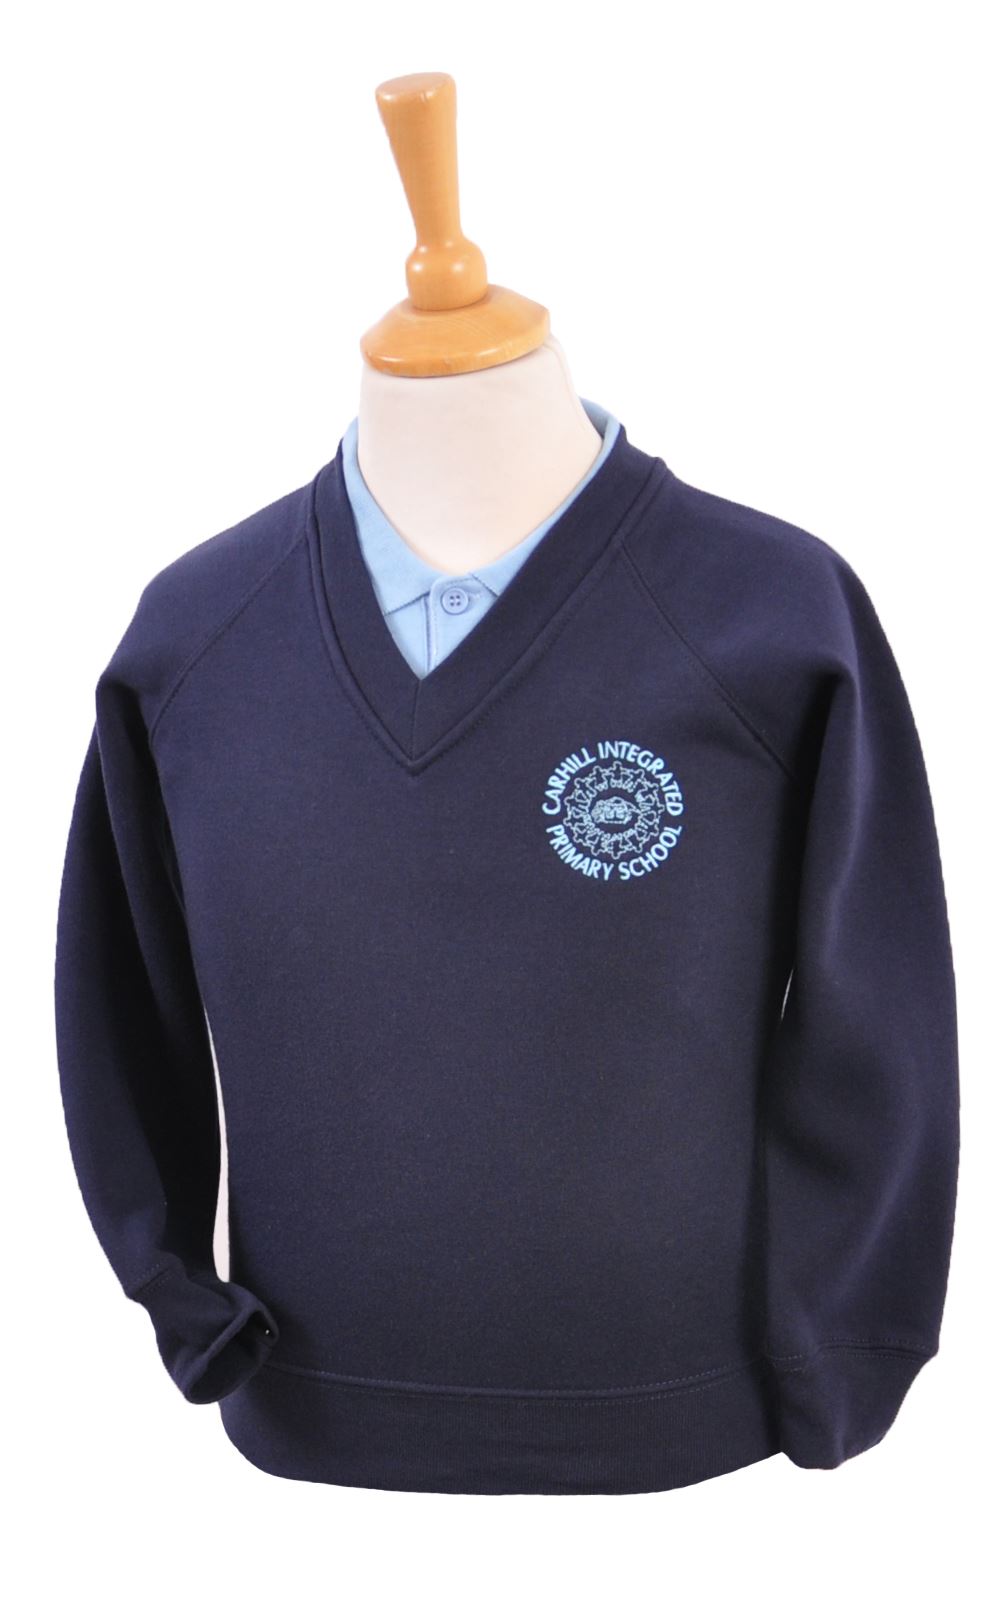 Picture of Carhill Integrated PS Sweatshirt - Woodbank